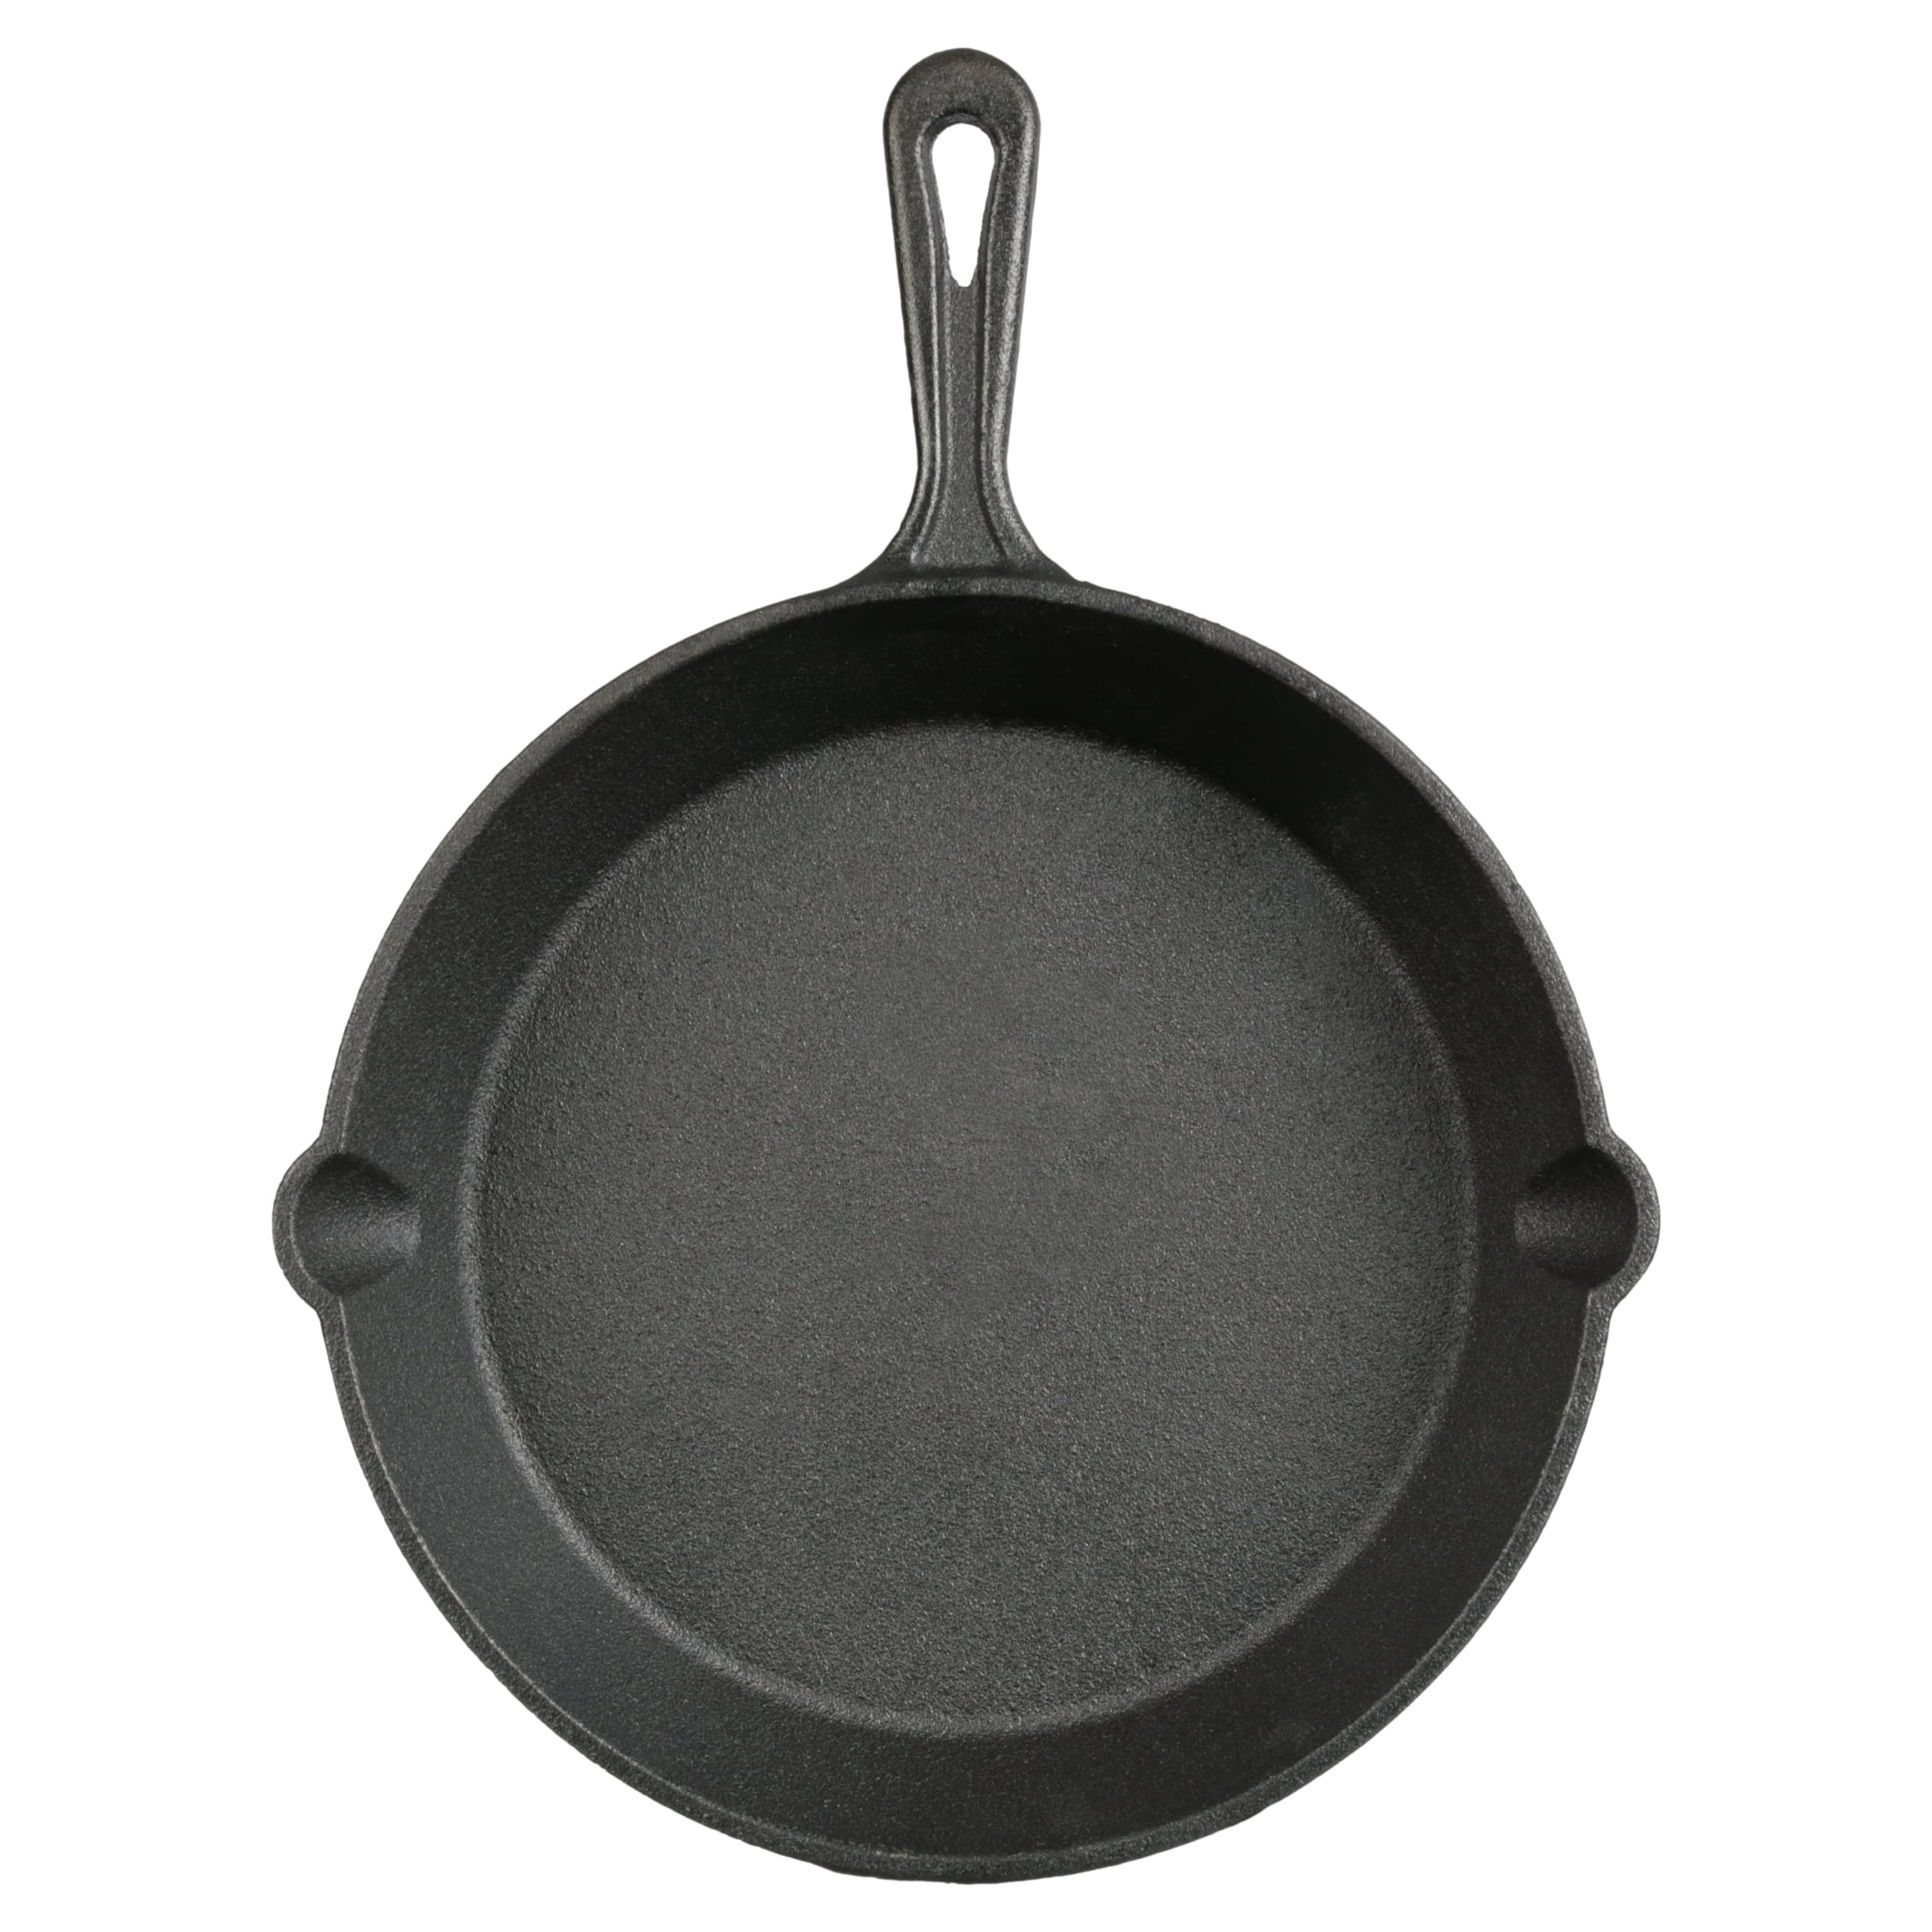 Ozark Trail 4-Piece Cast Iron Skillet Set with Handles and Griddle, Pre-Seasoned, 6 inch, 10.5 inch, 11 inch, Size: 6 inch,_10.5 inch,_11 inch